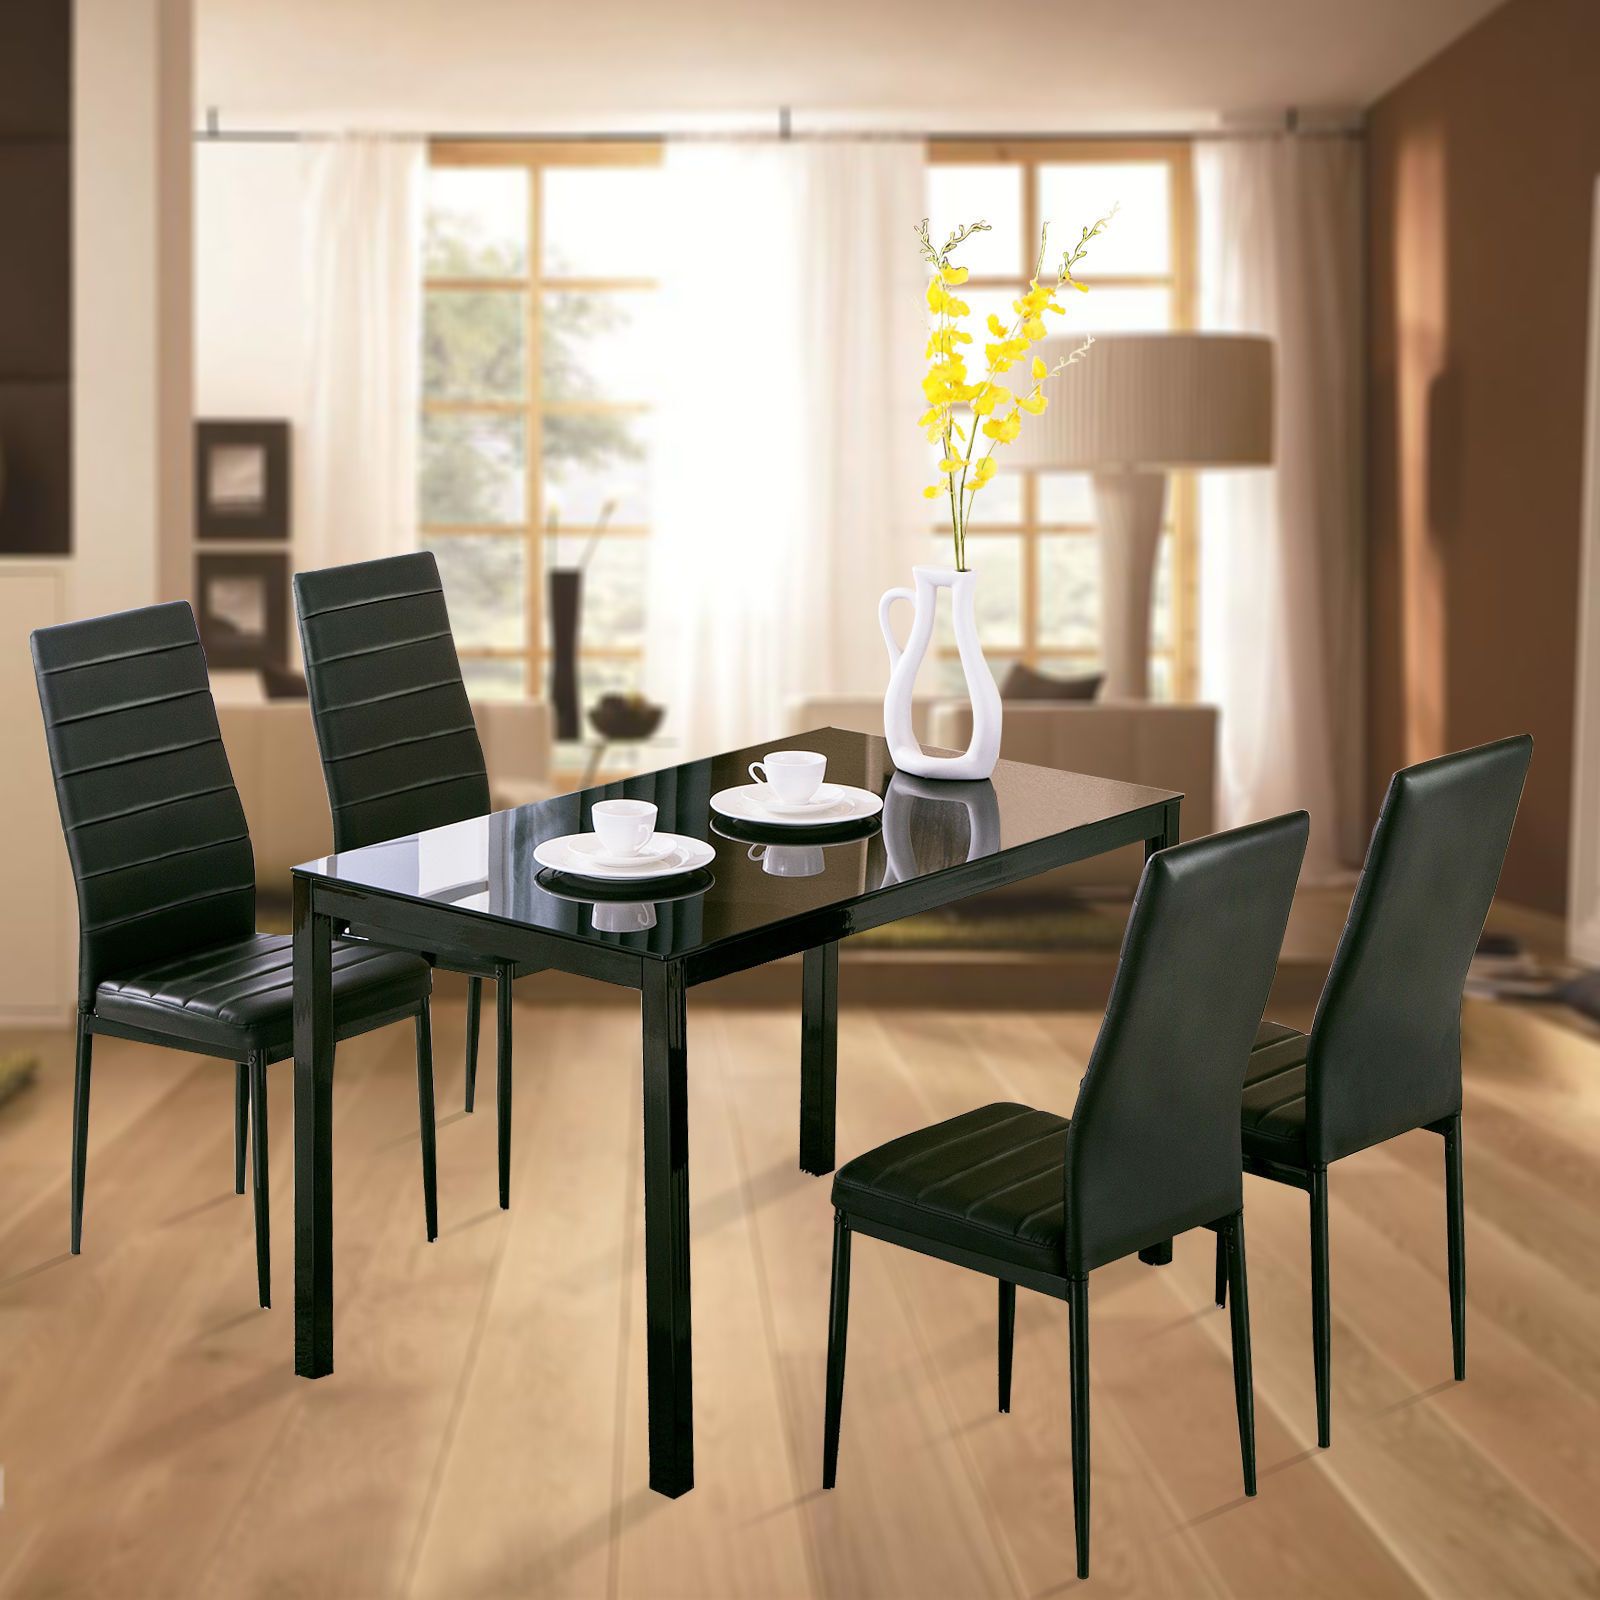 Factory Direct: Dining Chairs Kitchen Table Chairs Set Of 2 Dining Inside Most Up To Date Amir 5 Piece Solid Wood Dining Sets (Set Of 5) (View 20 of 20)